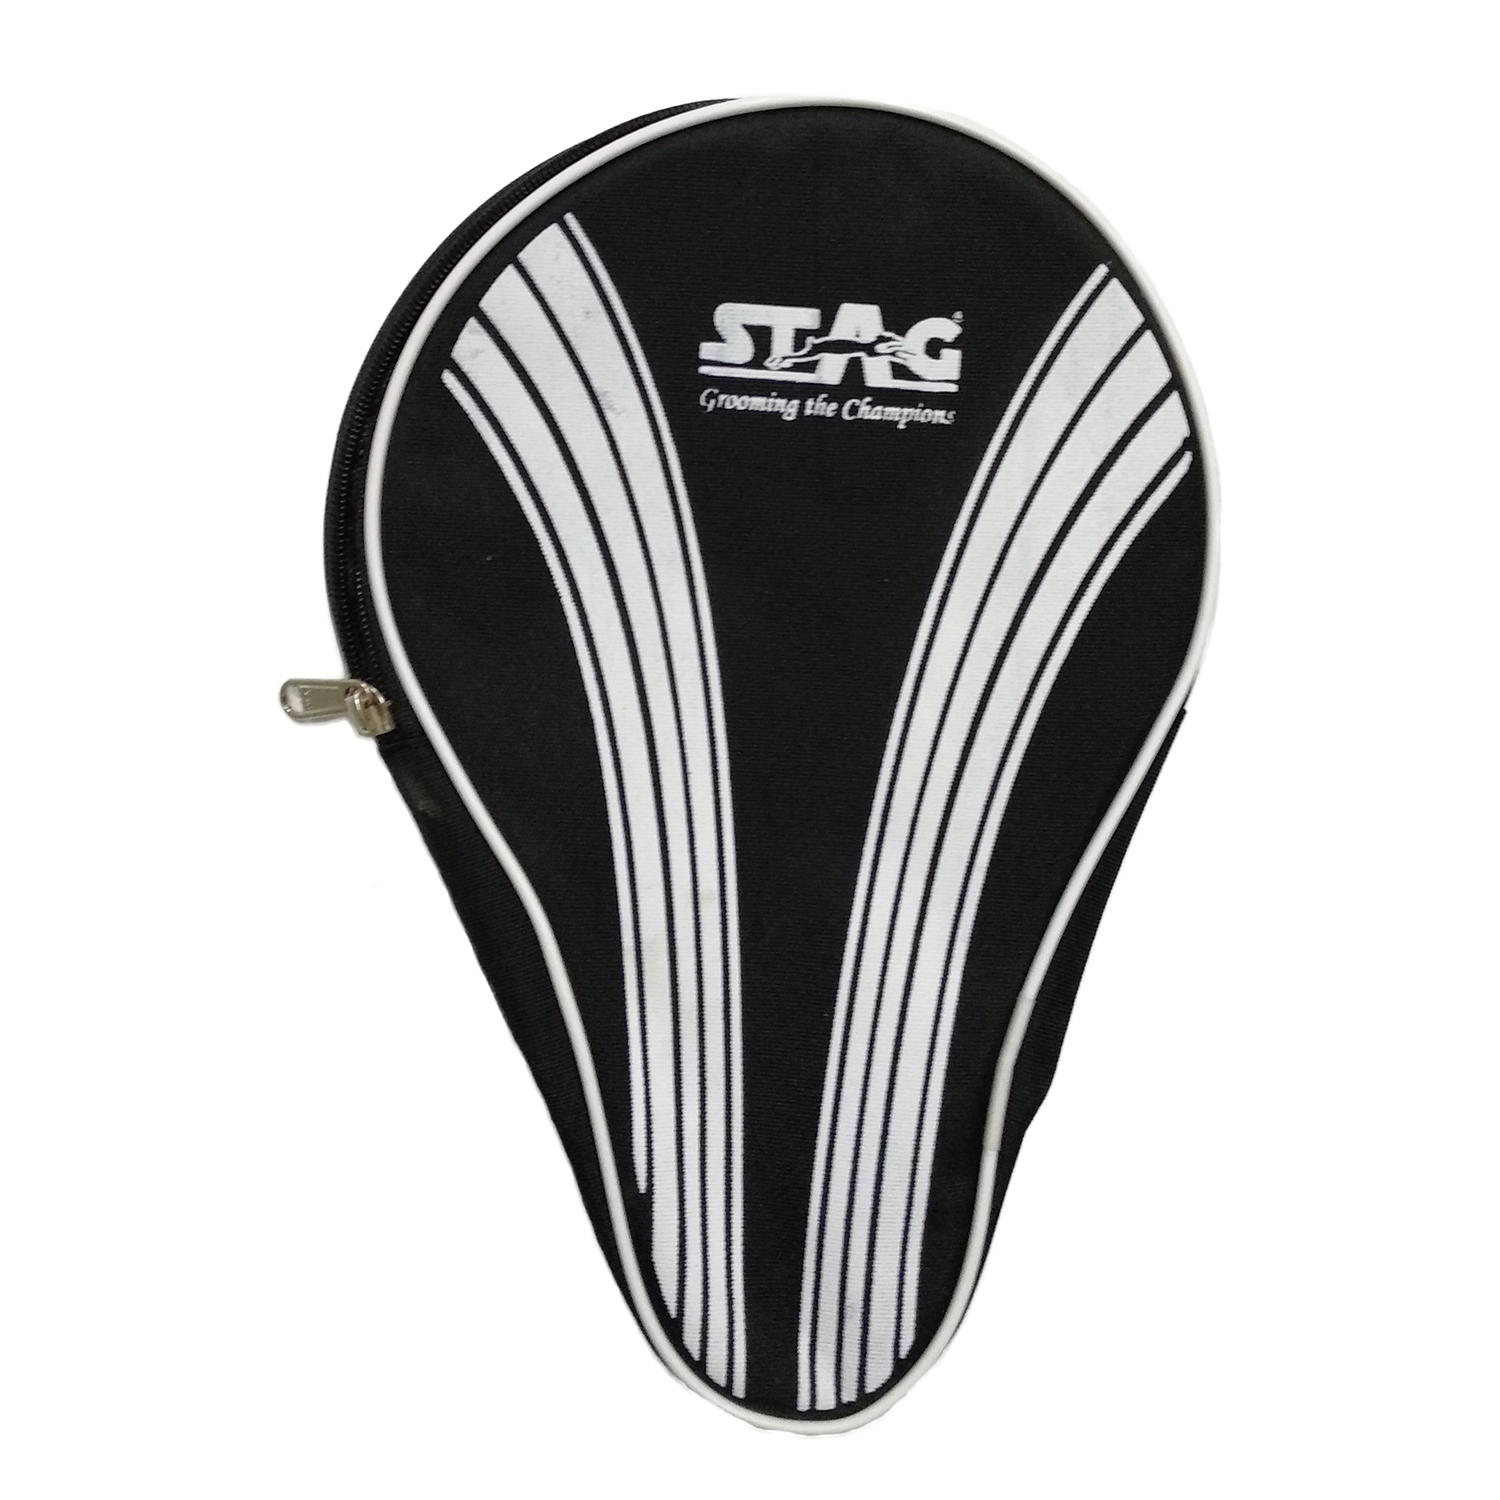 Stag TT 706 Racket Cover With Padding - Black & White